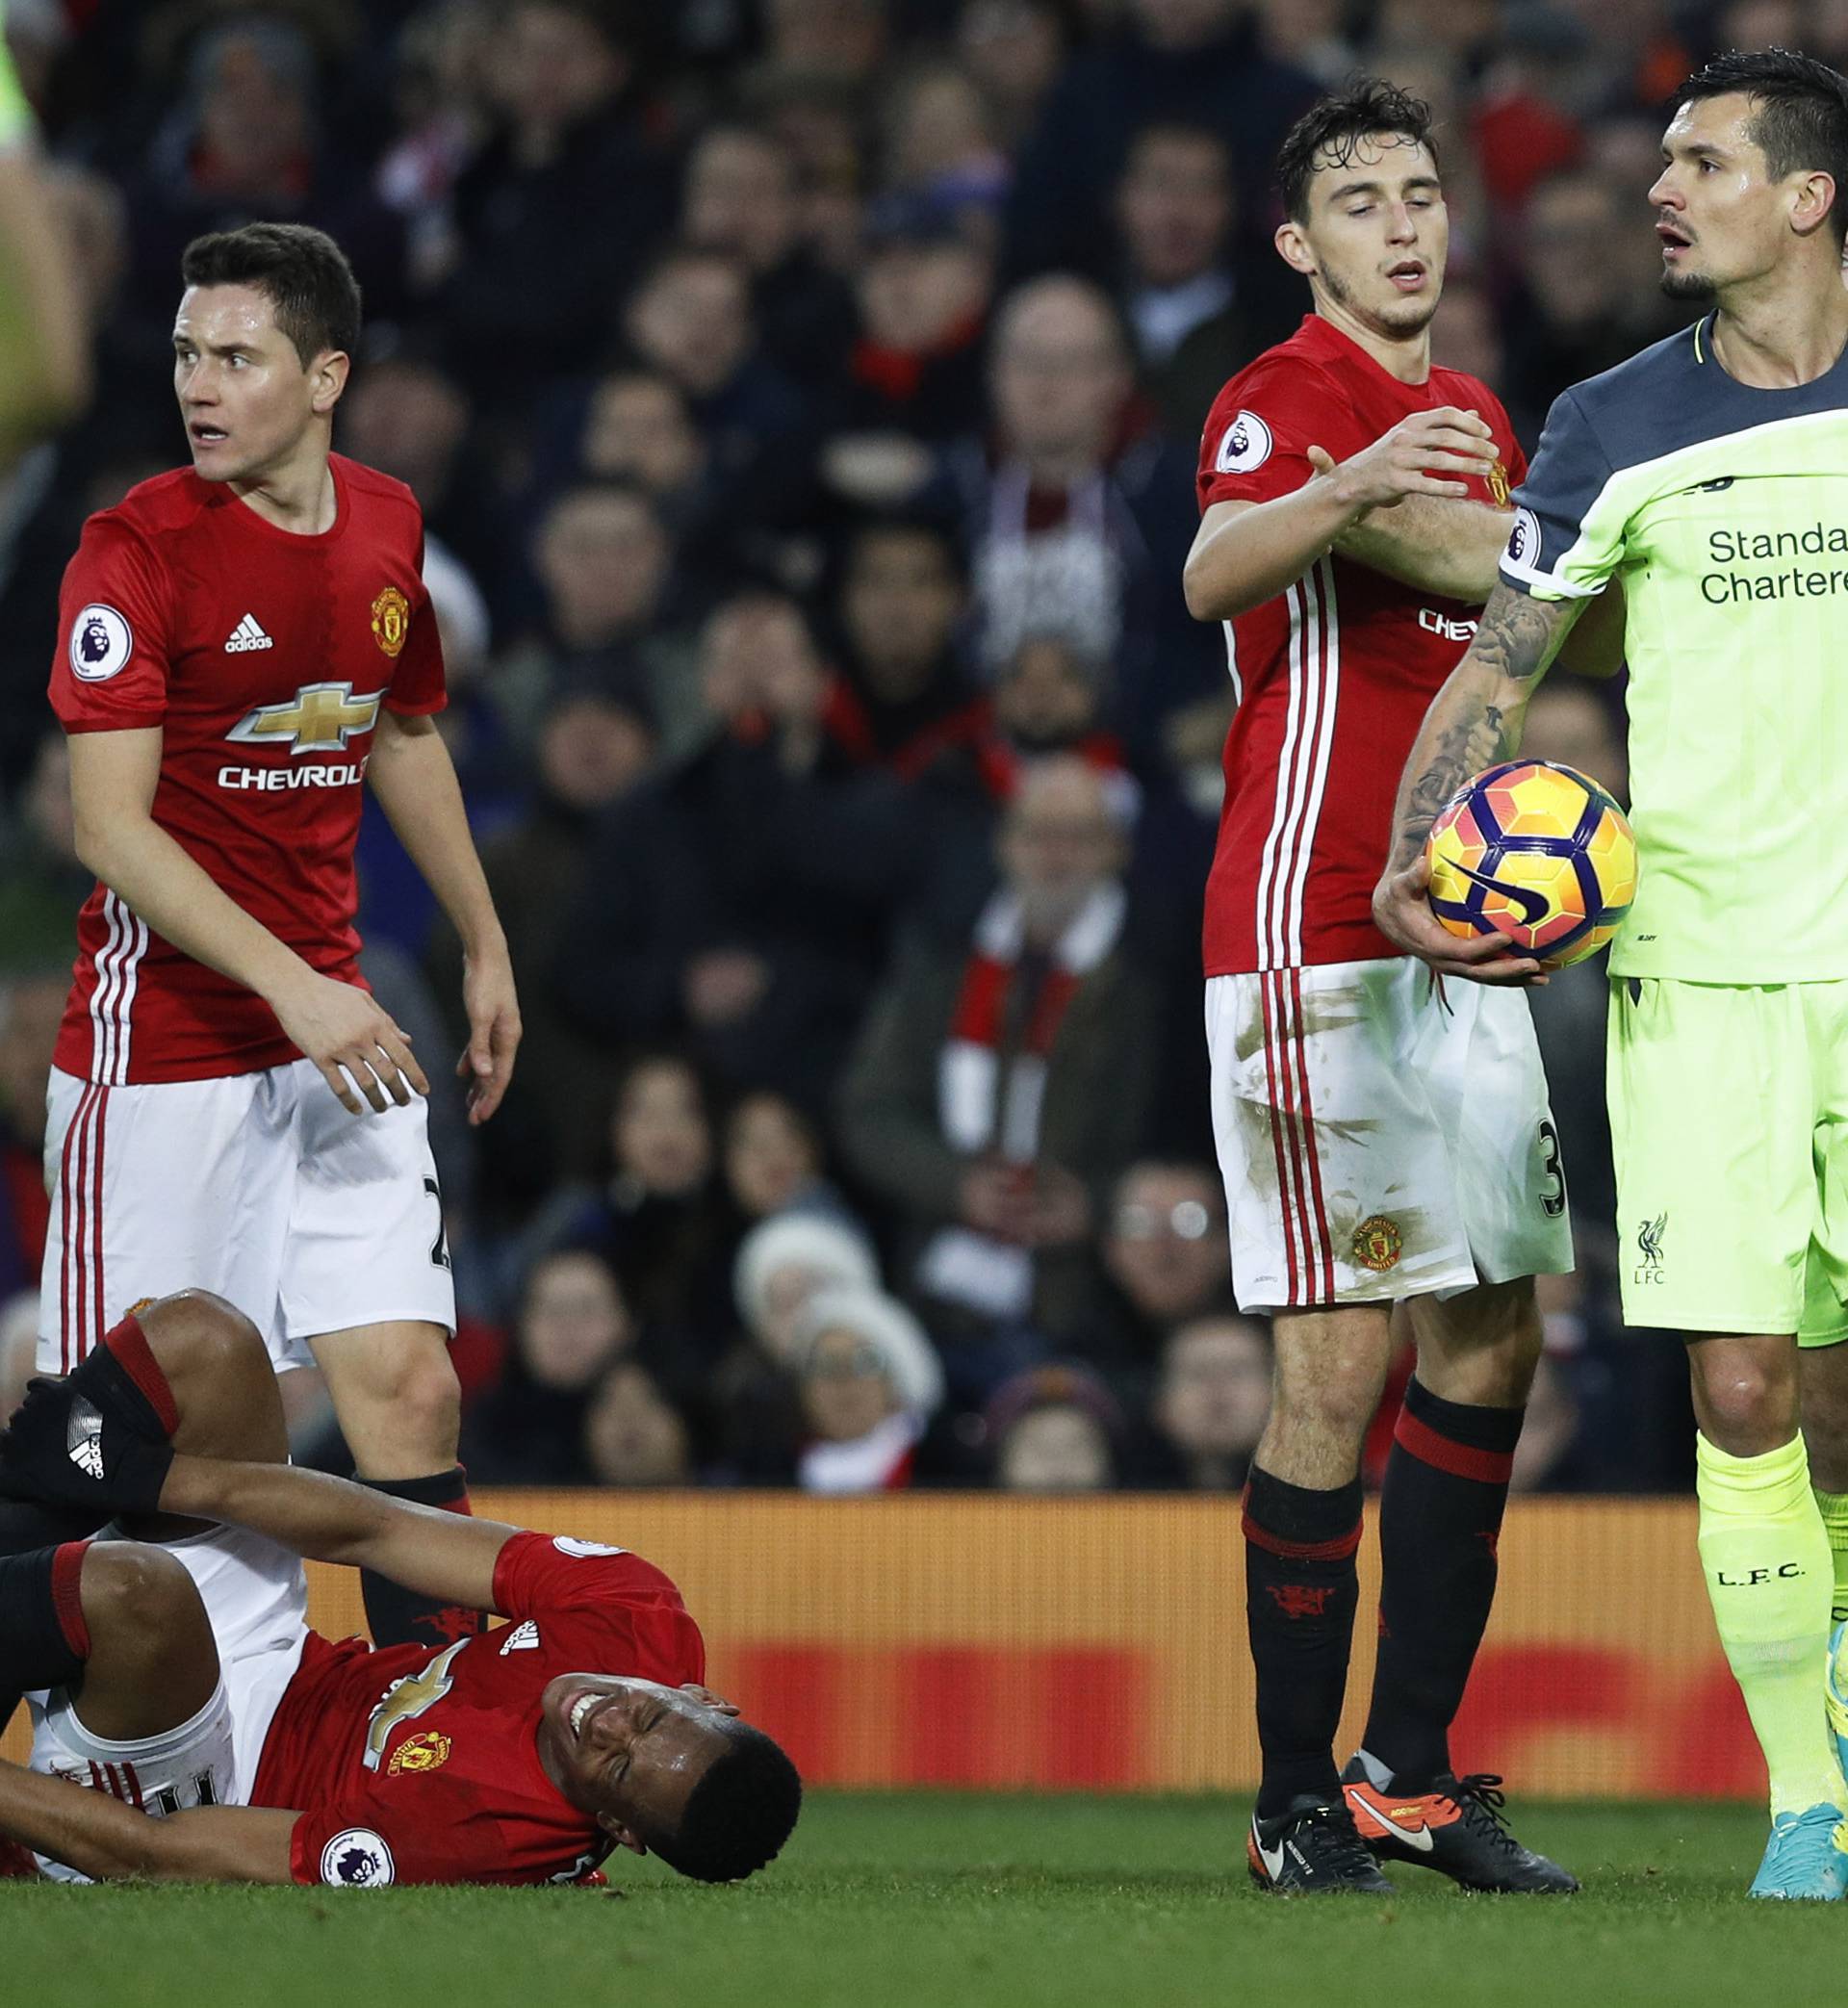 Manchester United's Anthony Martial lies injured after a foul by Liverpool's Dejan Lovren